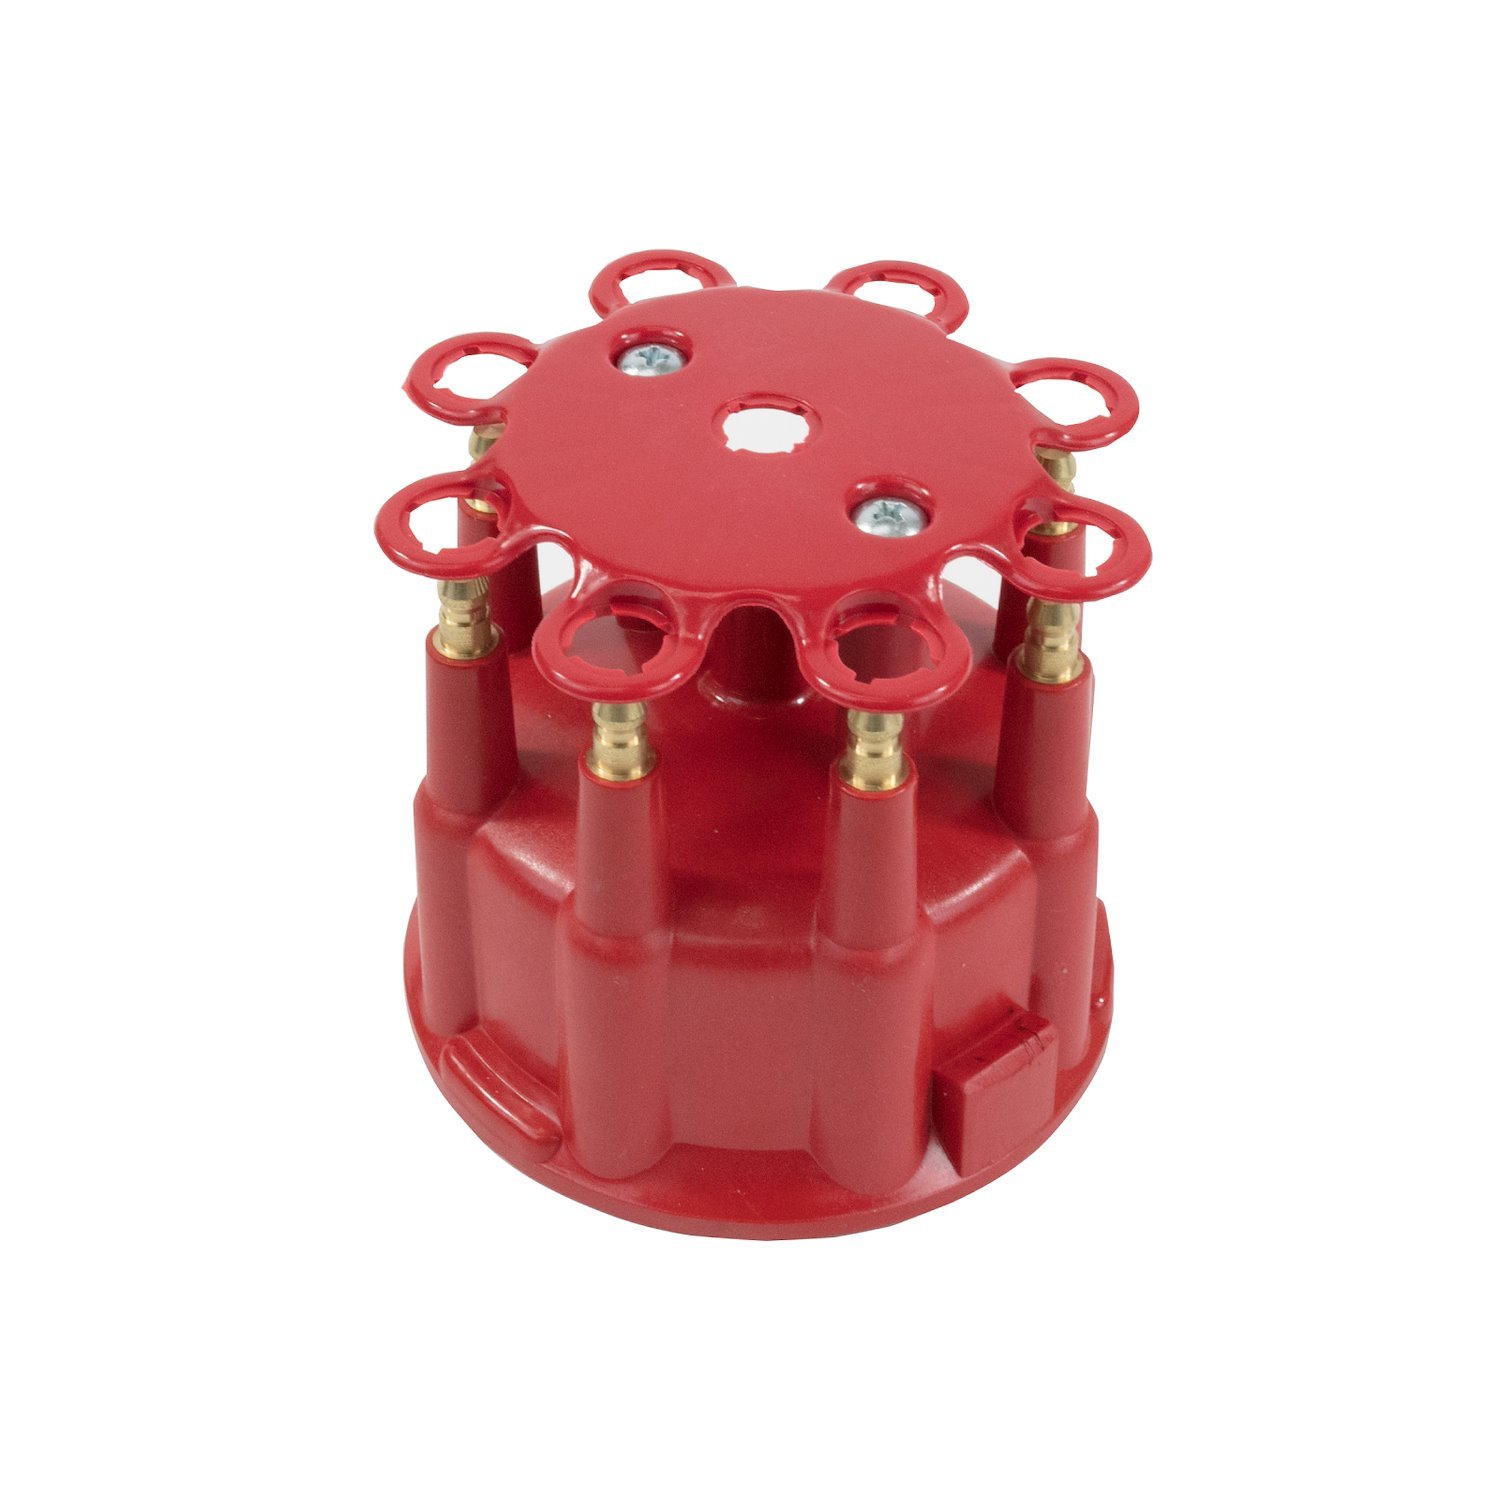 JM6971R Pro Billet & Ready-to-Run Distributor Cap and Rotor Kit, 8 Cyl Male, Red